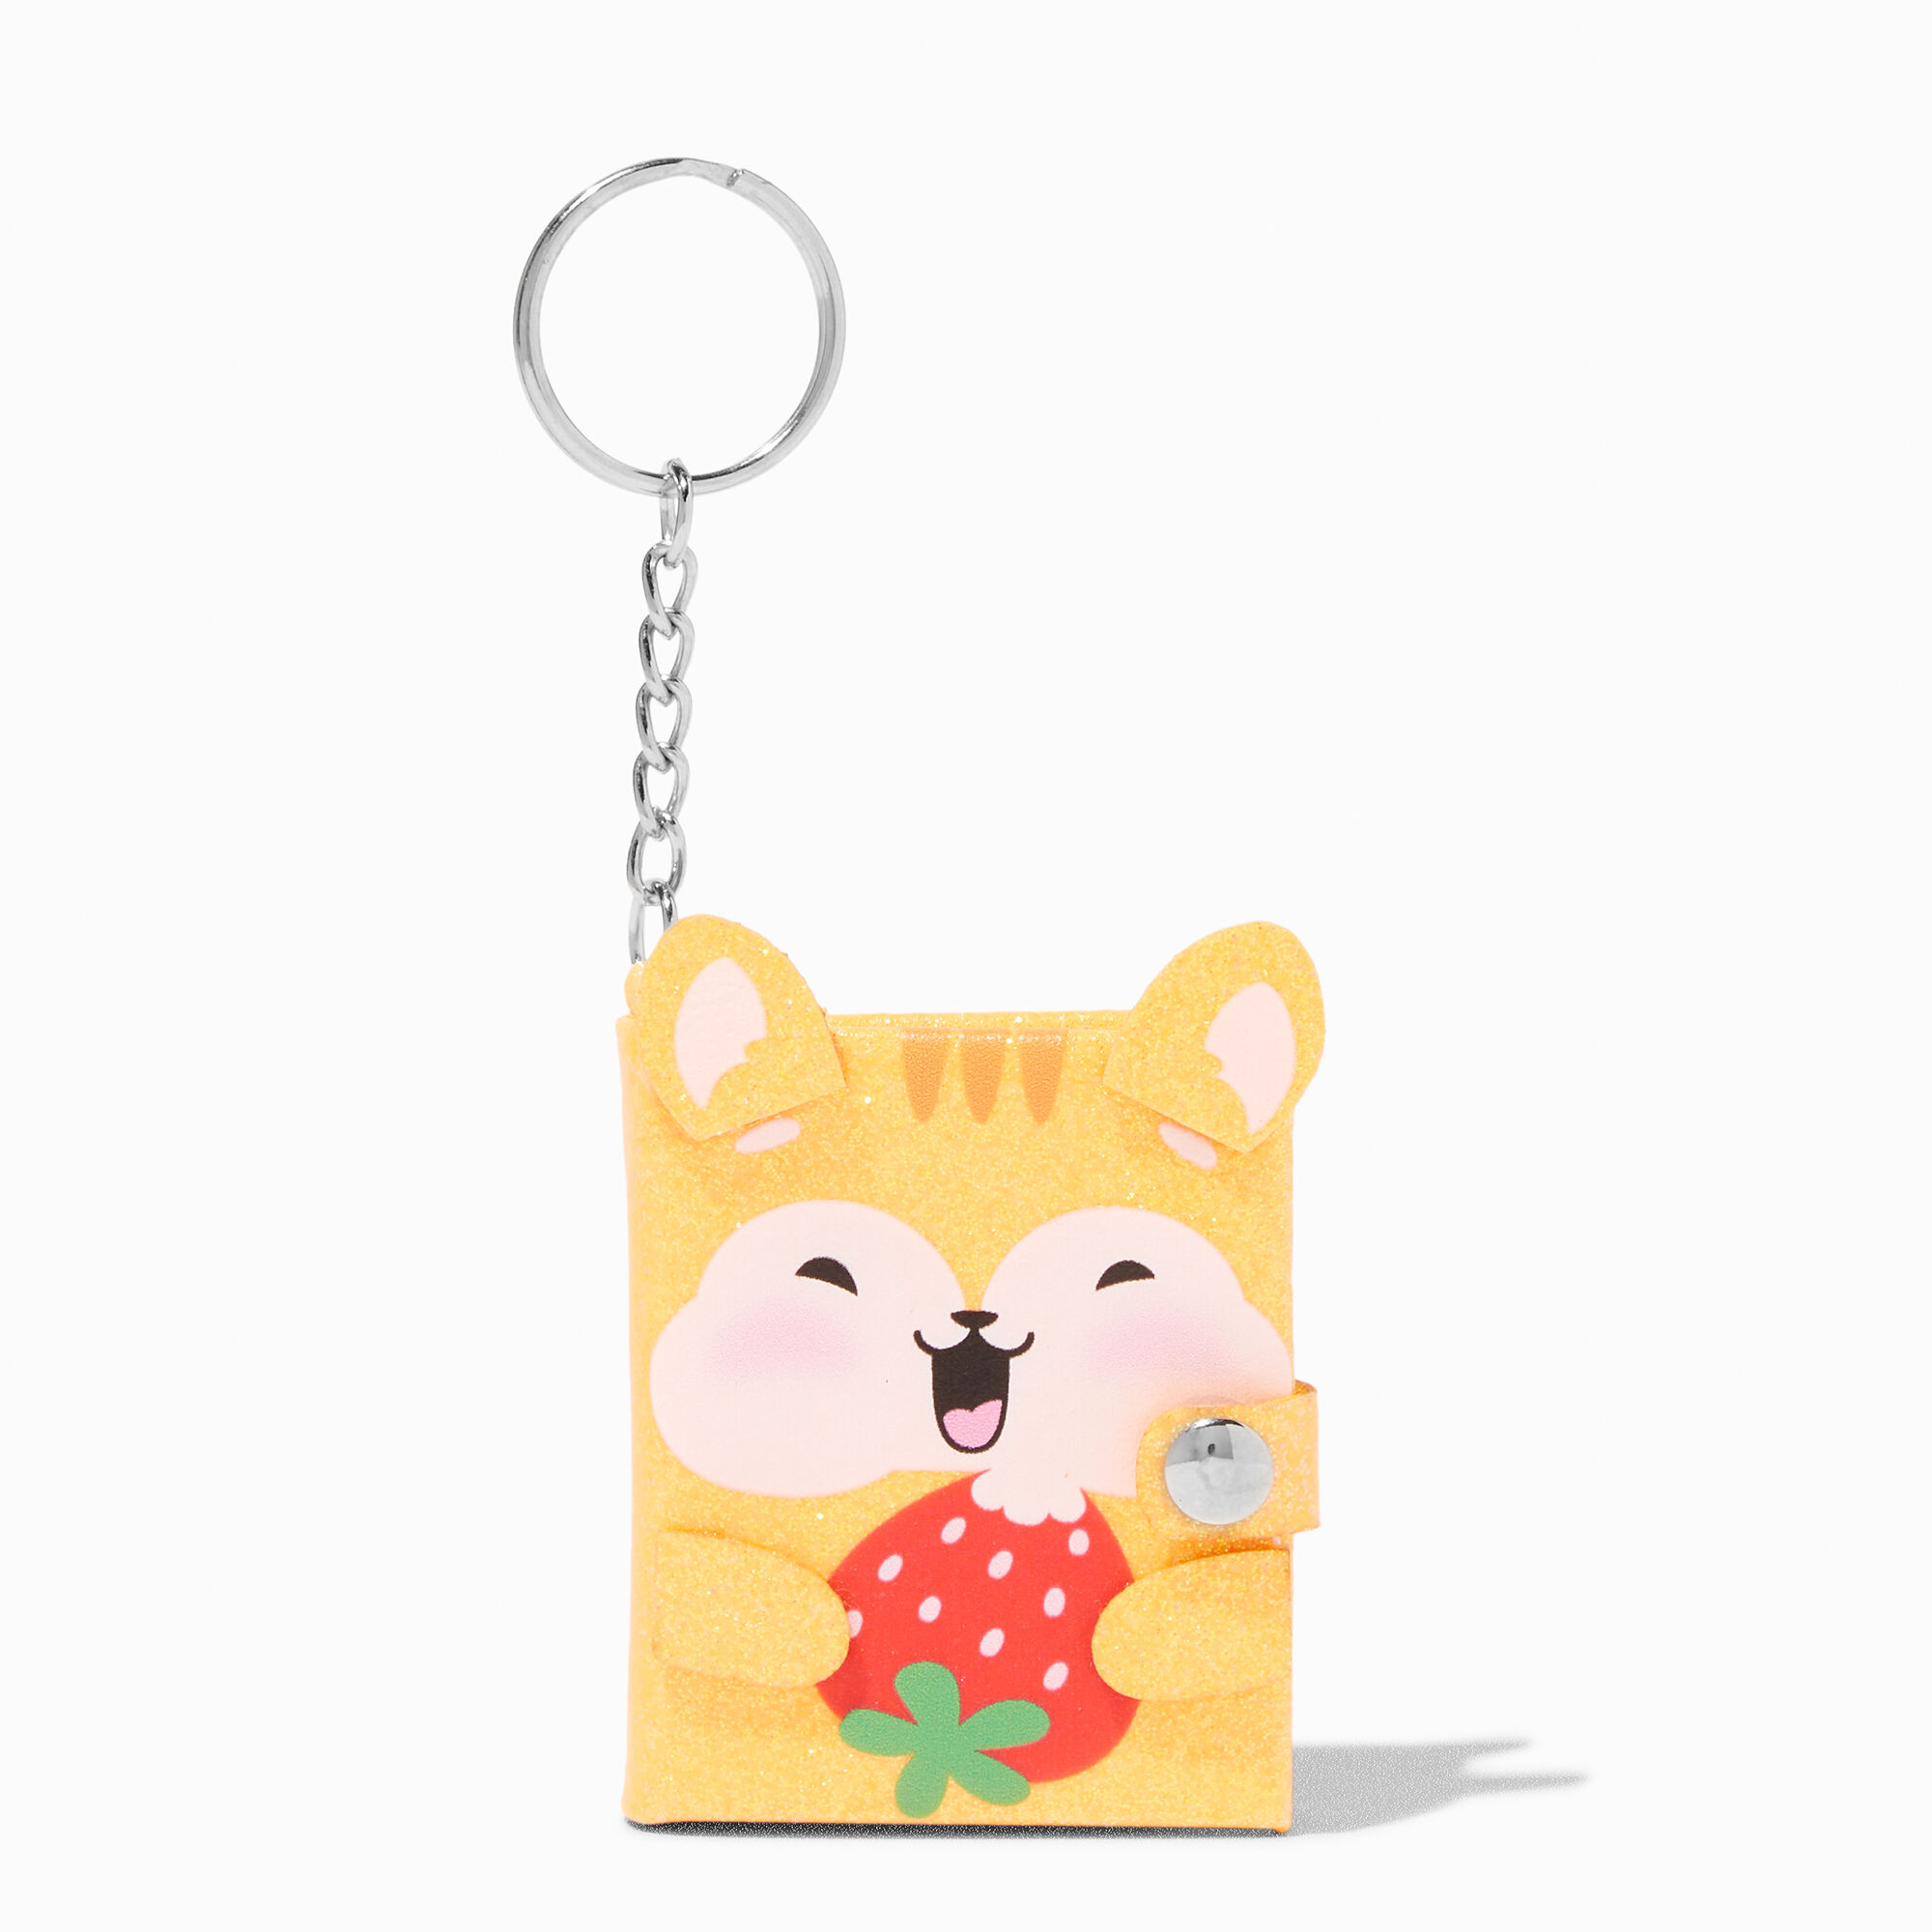 View Claires Strawberry Hamster Glitter Mini Diary Keychain information